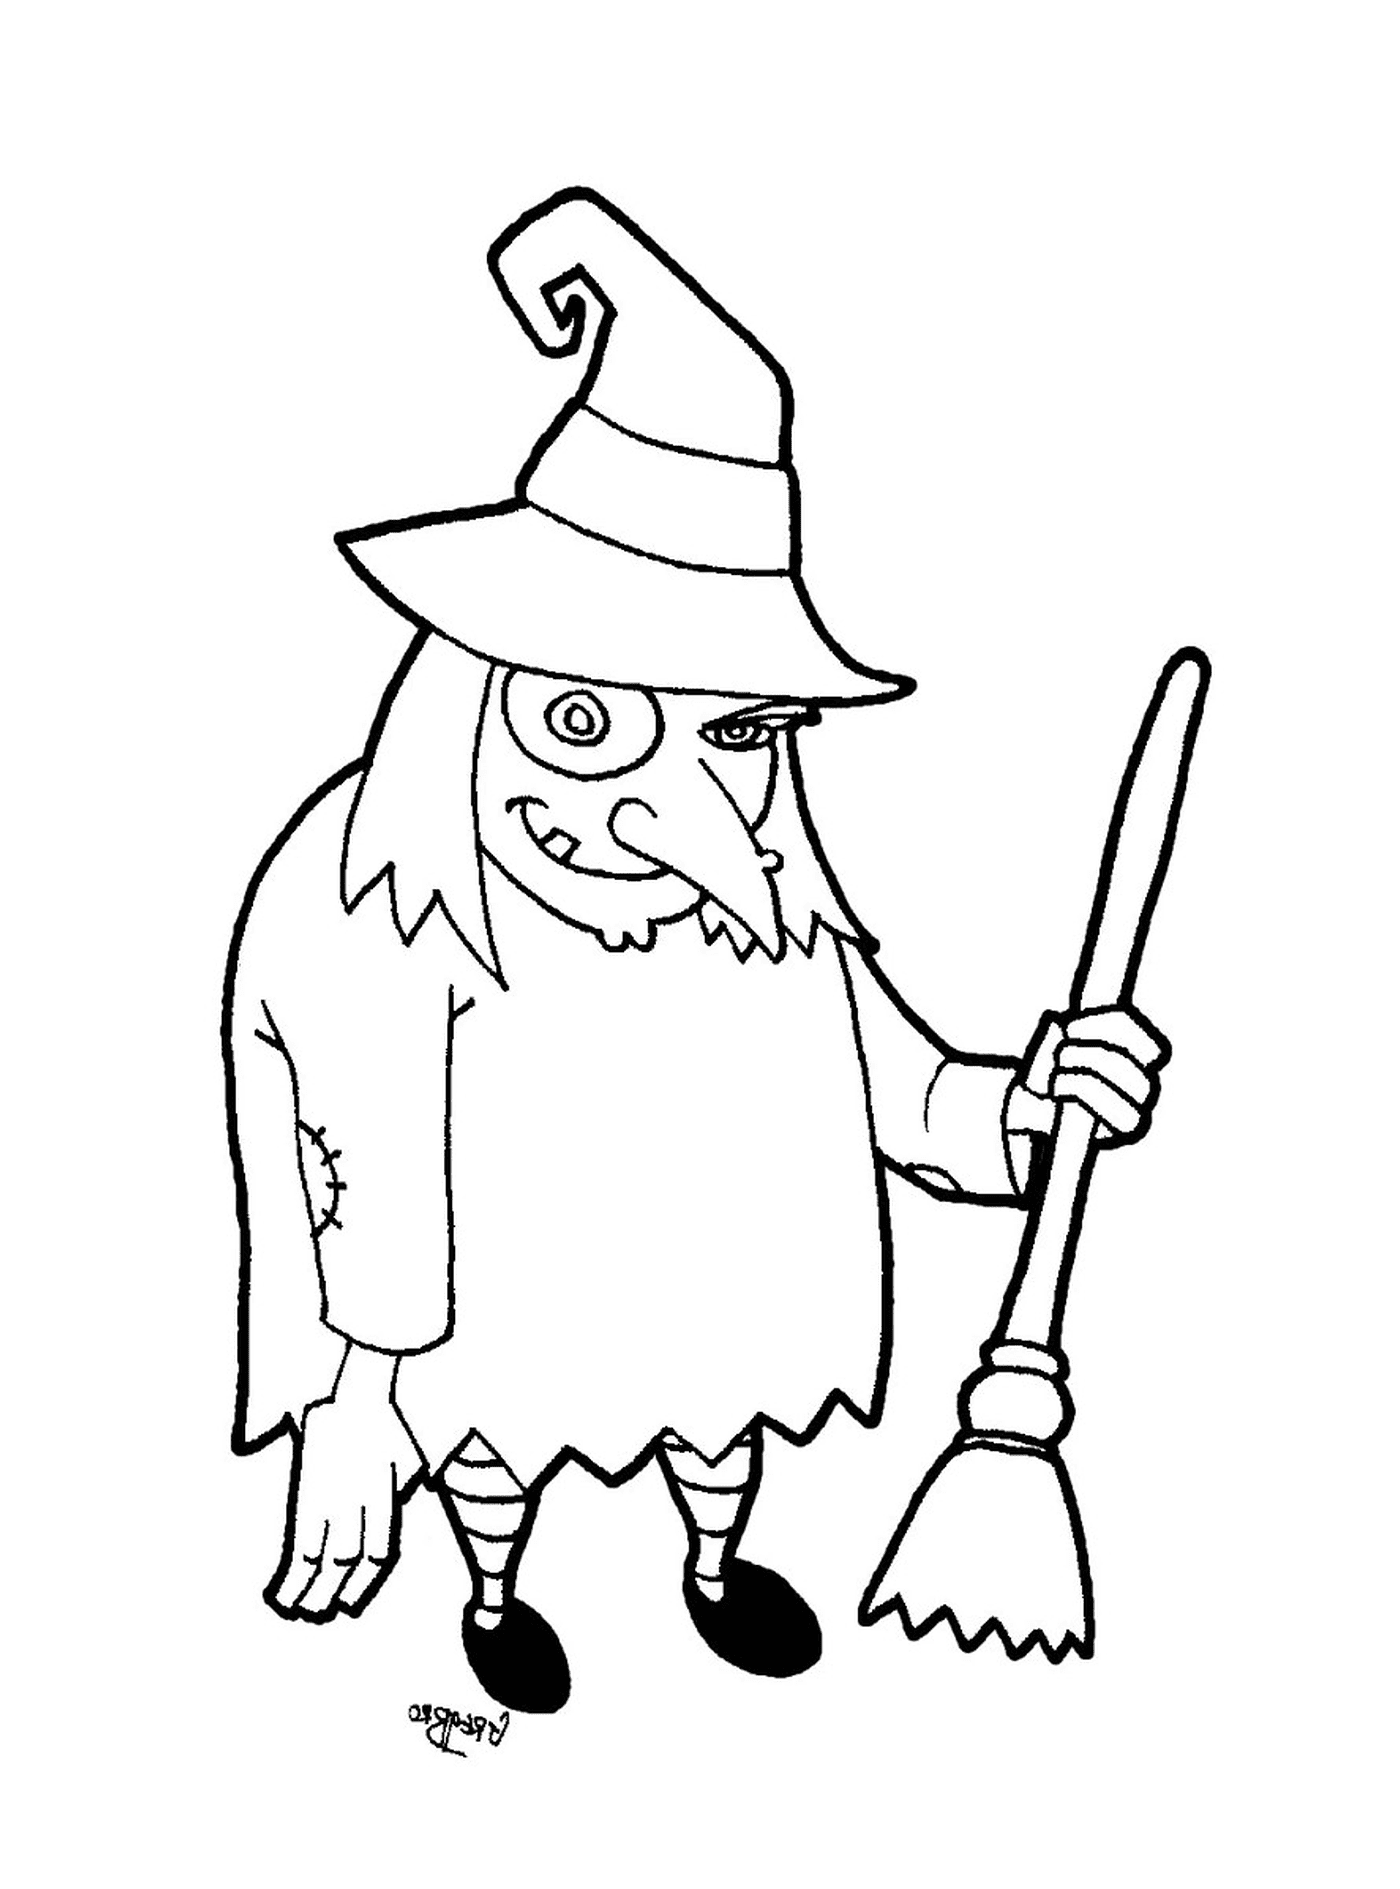  Witch holding a broom 